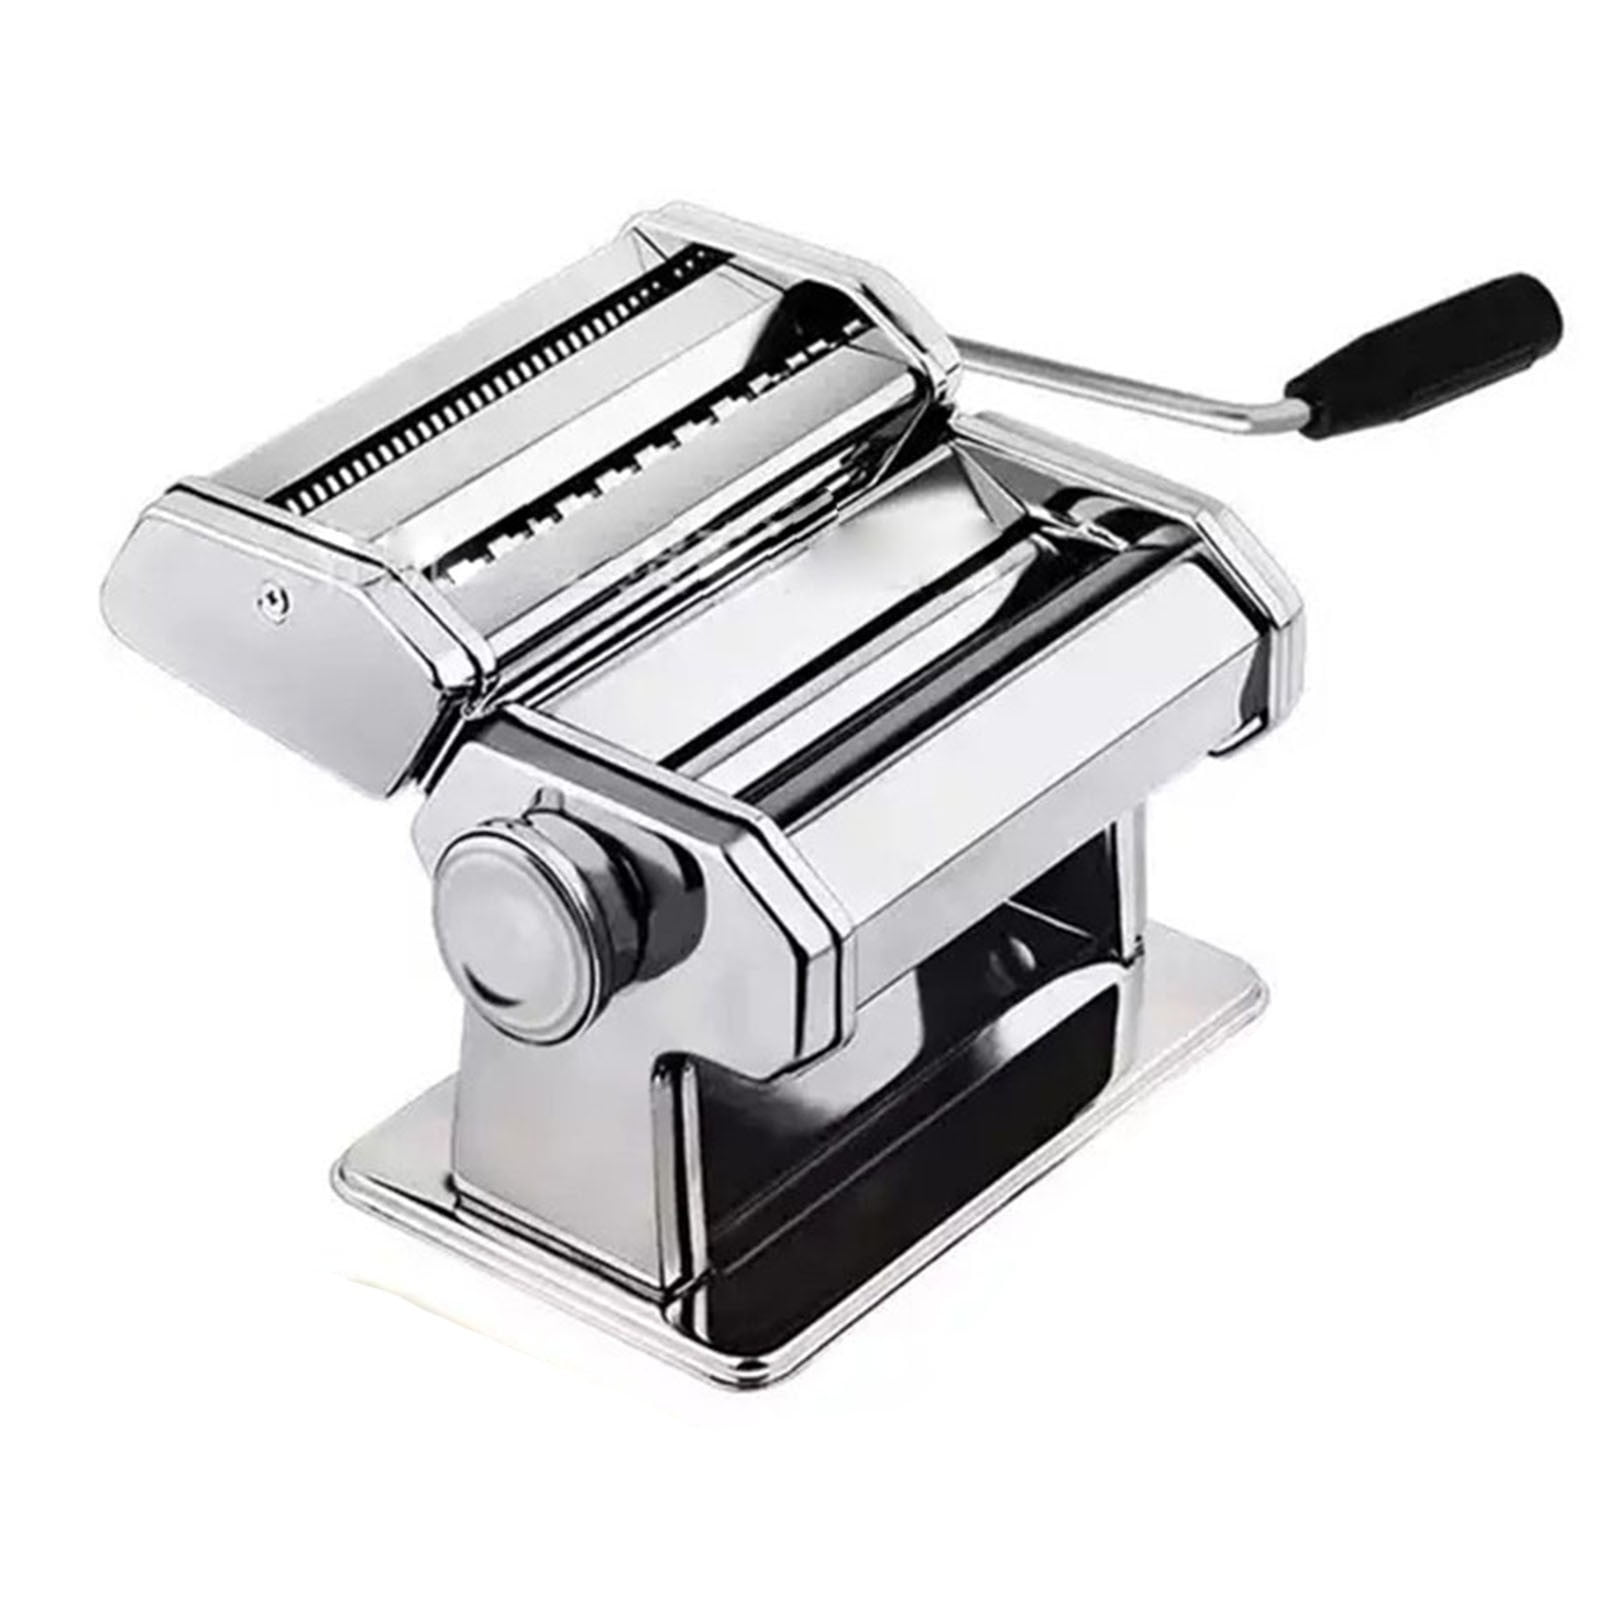 Pasta Makers for sale in Los Angeles, California